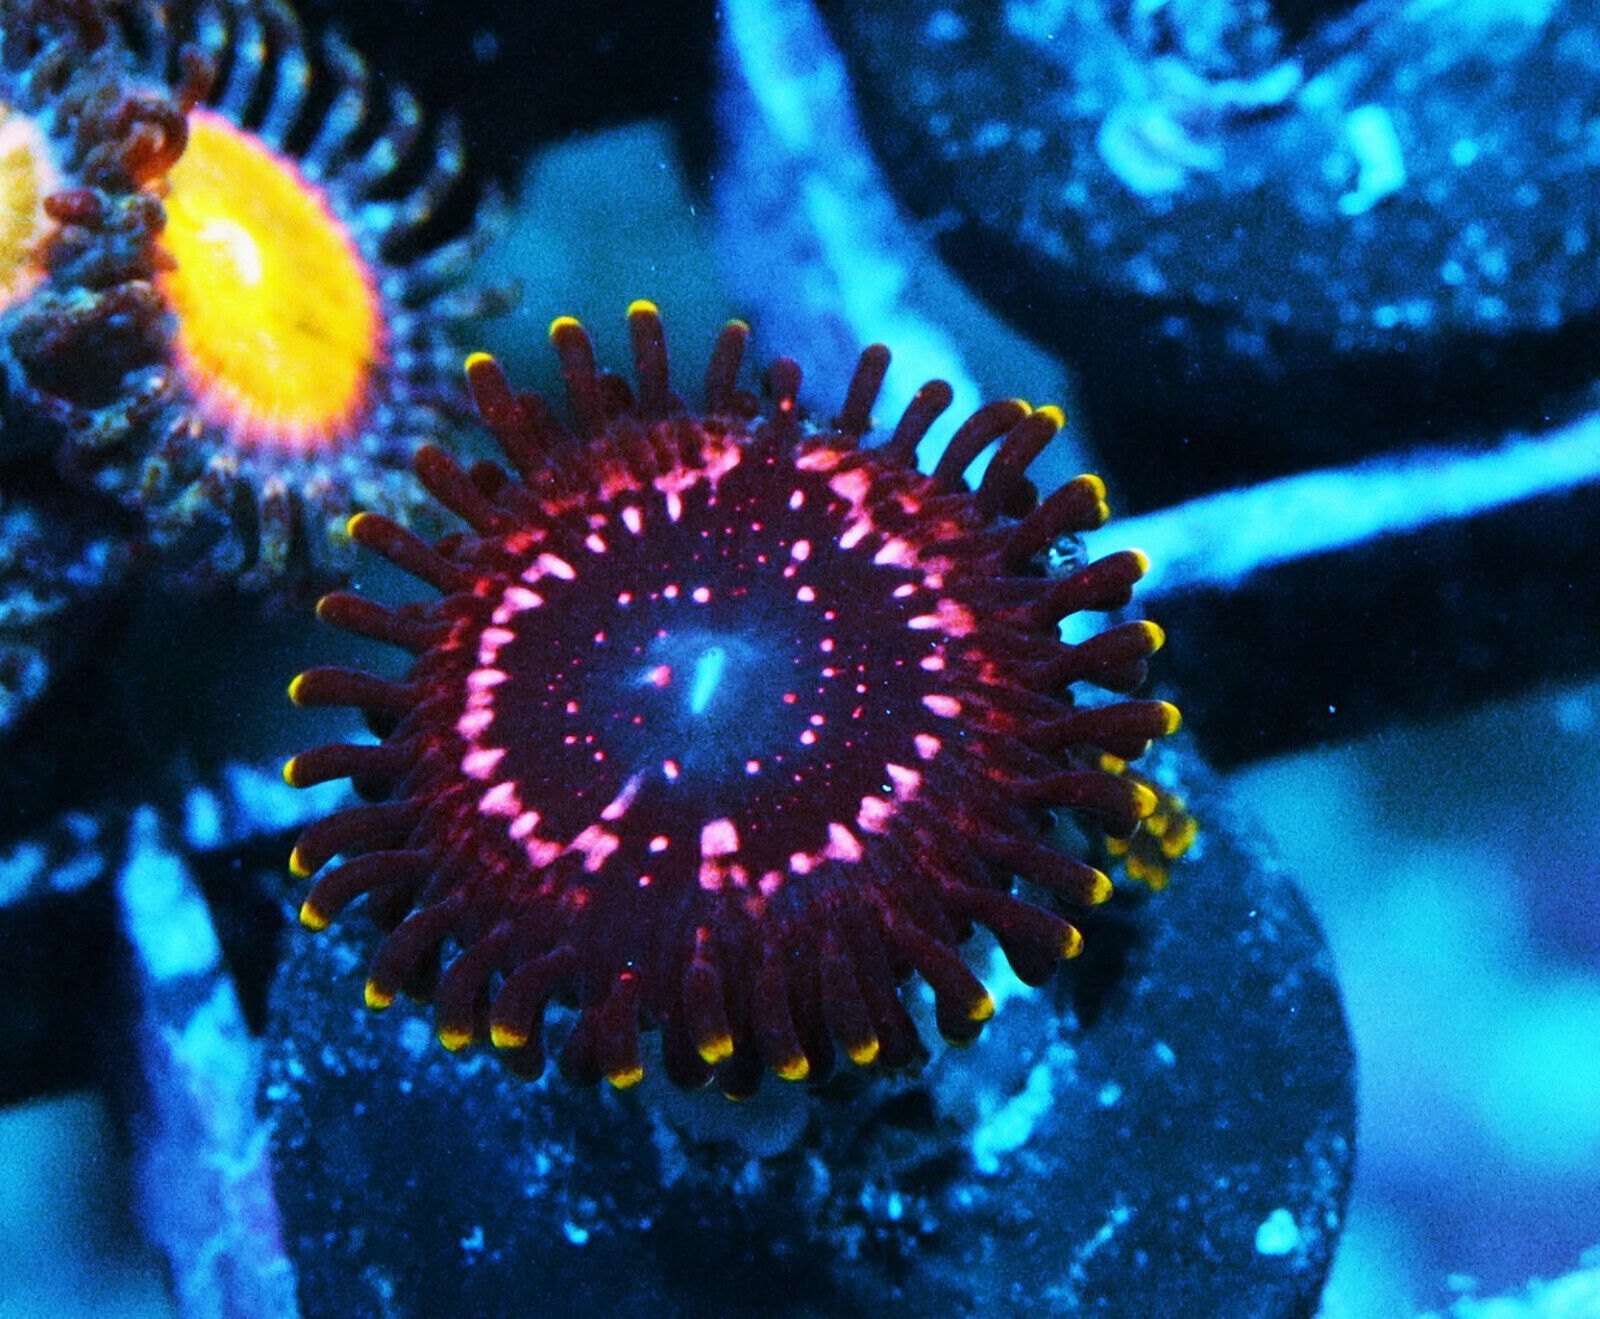 WWC Taser Paly Zoanthids Zoa SPS LPS Corals, WYSIWYG